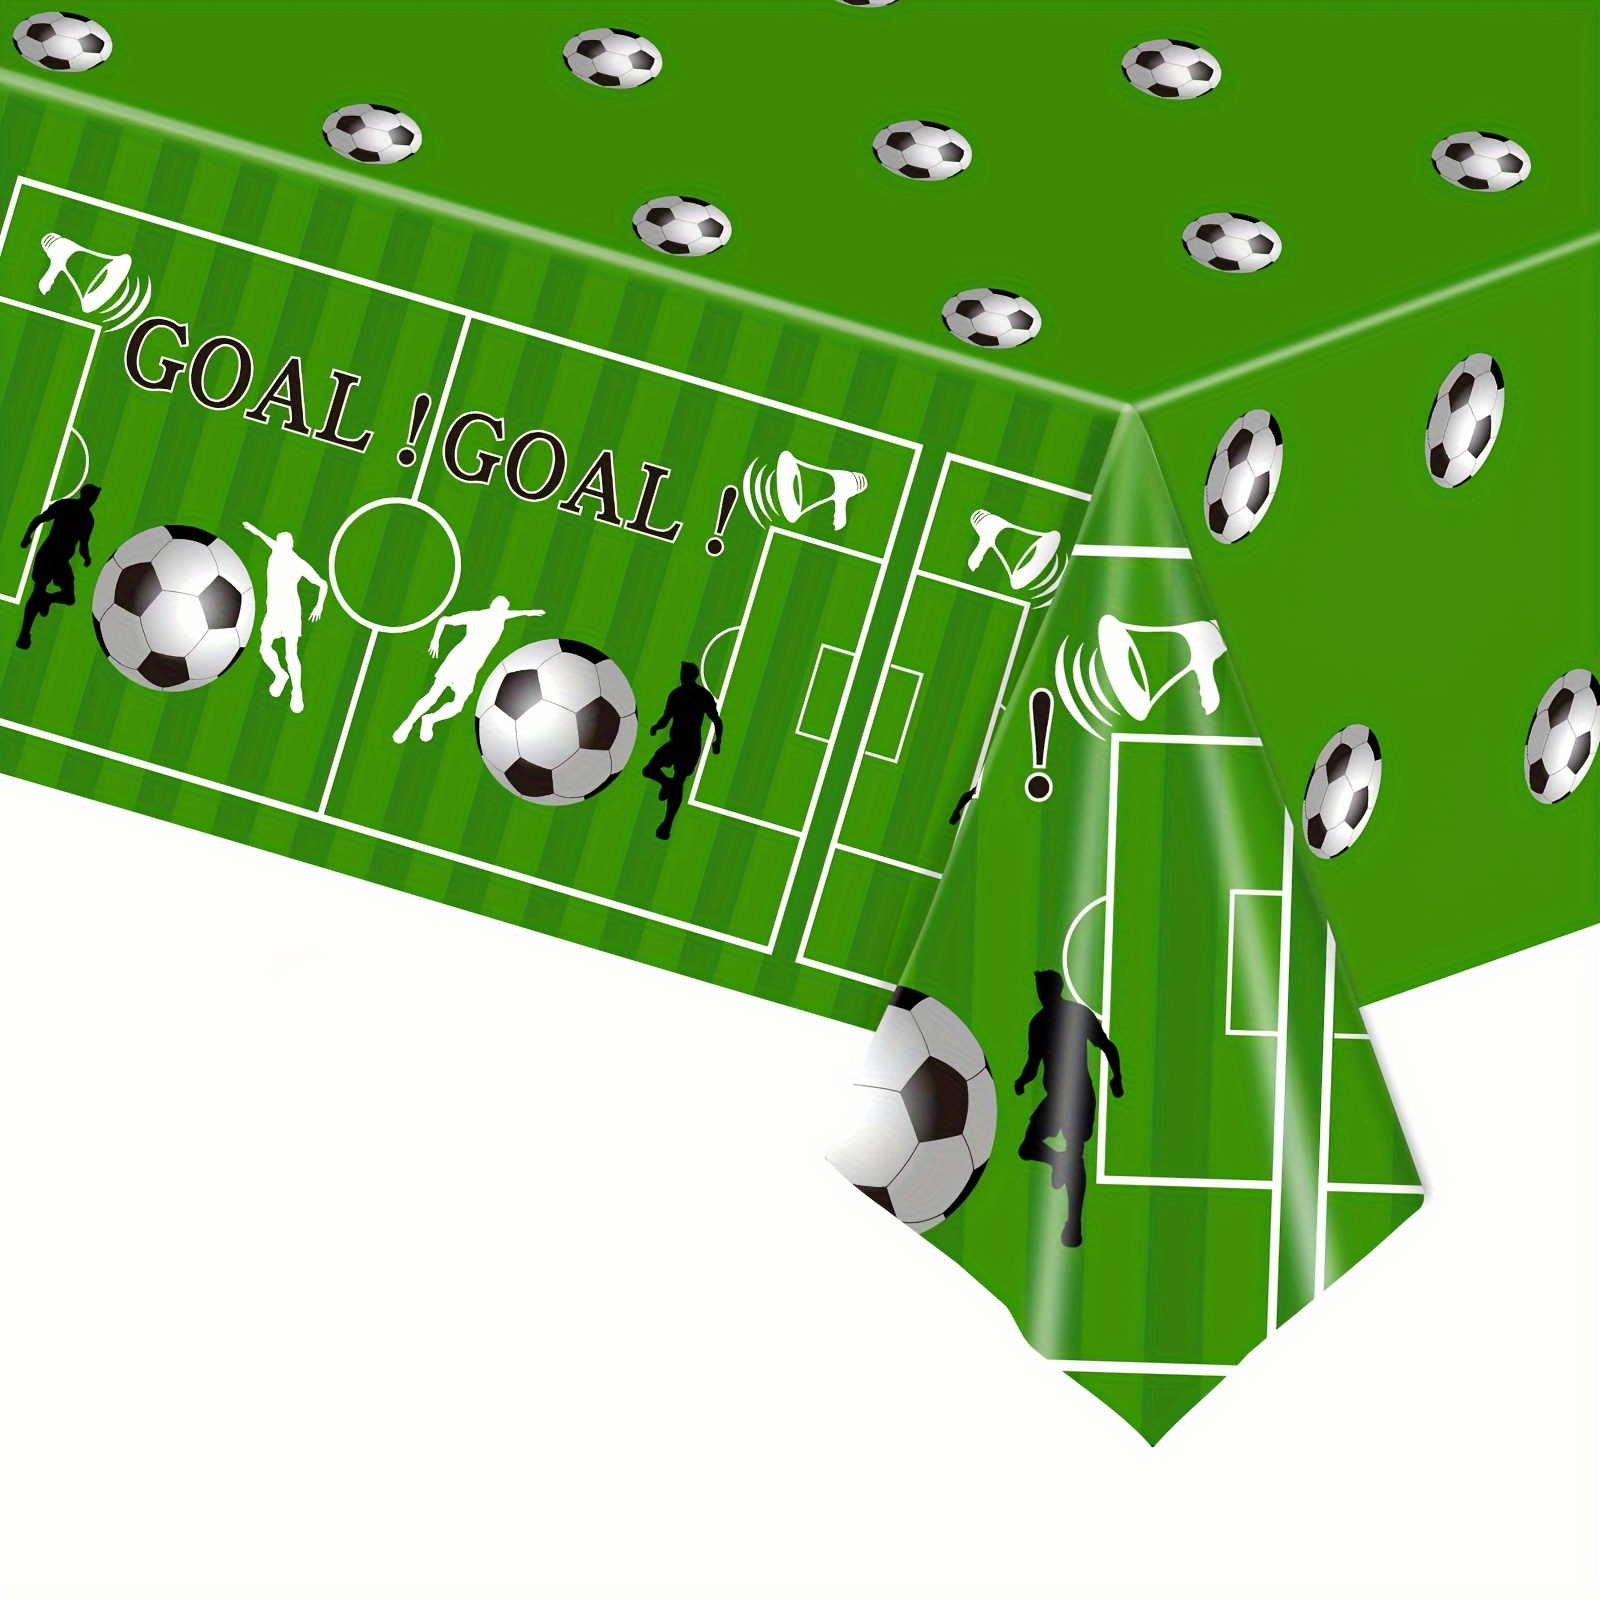 

Soccer Theme Party Plastic Tablecloth - 1pc Football Field Design Table Cover For Wedding, Birthday, Graduation, General Gathering & More - Durable, Machine Made Event Tablecloth - Festive Decoration